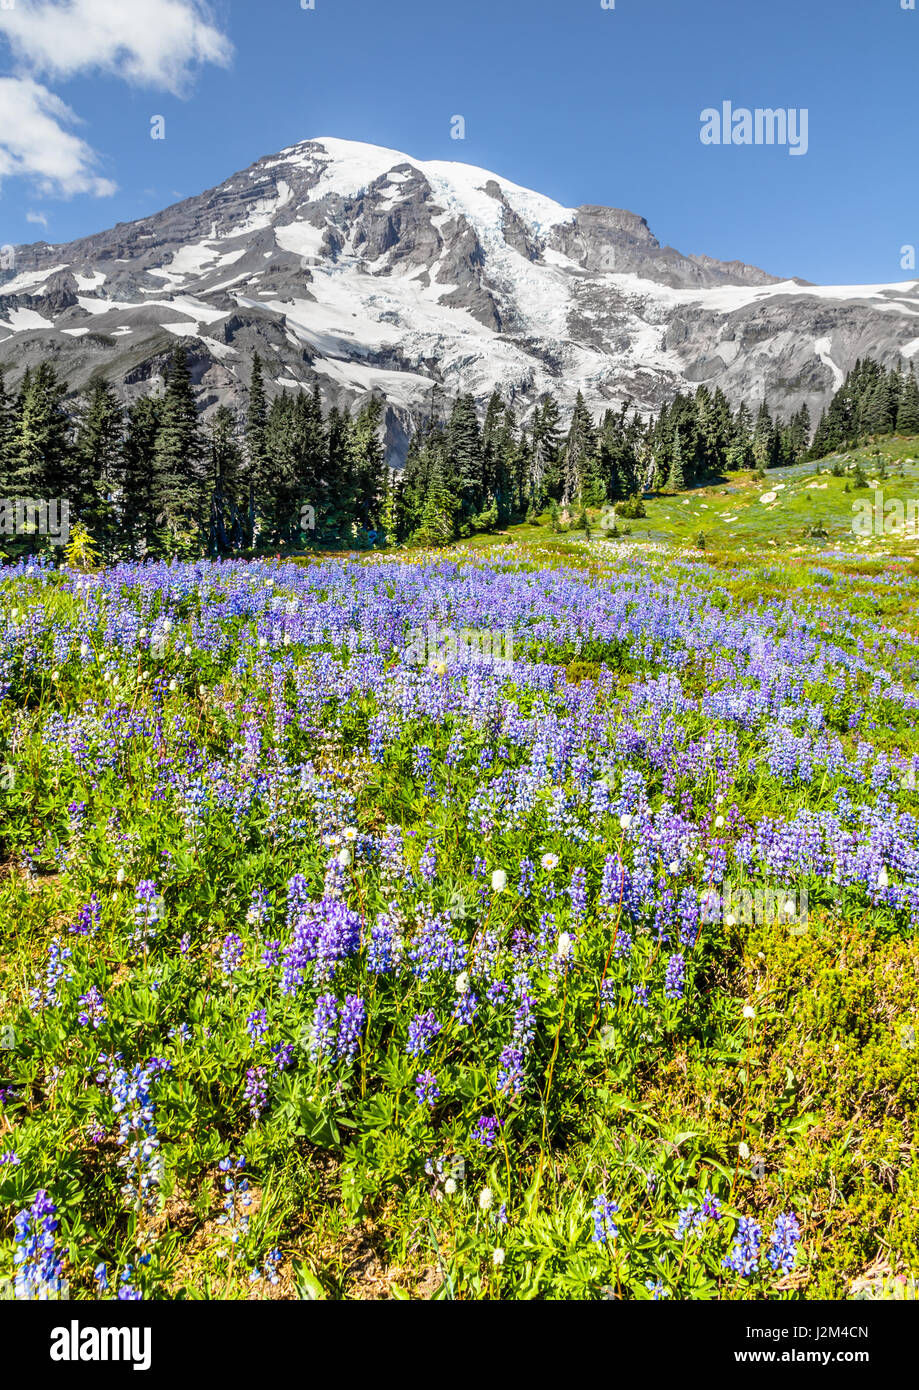 Mount Rainier sits majestically above blue lupine meadow and a band of conifers.  Blue sky complements vertical image and highlights glaciers on peak Stock Photo